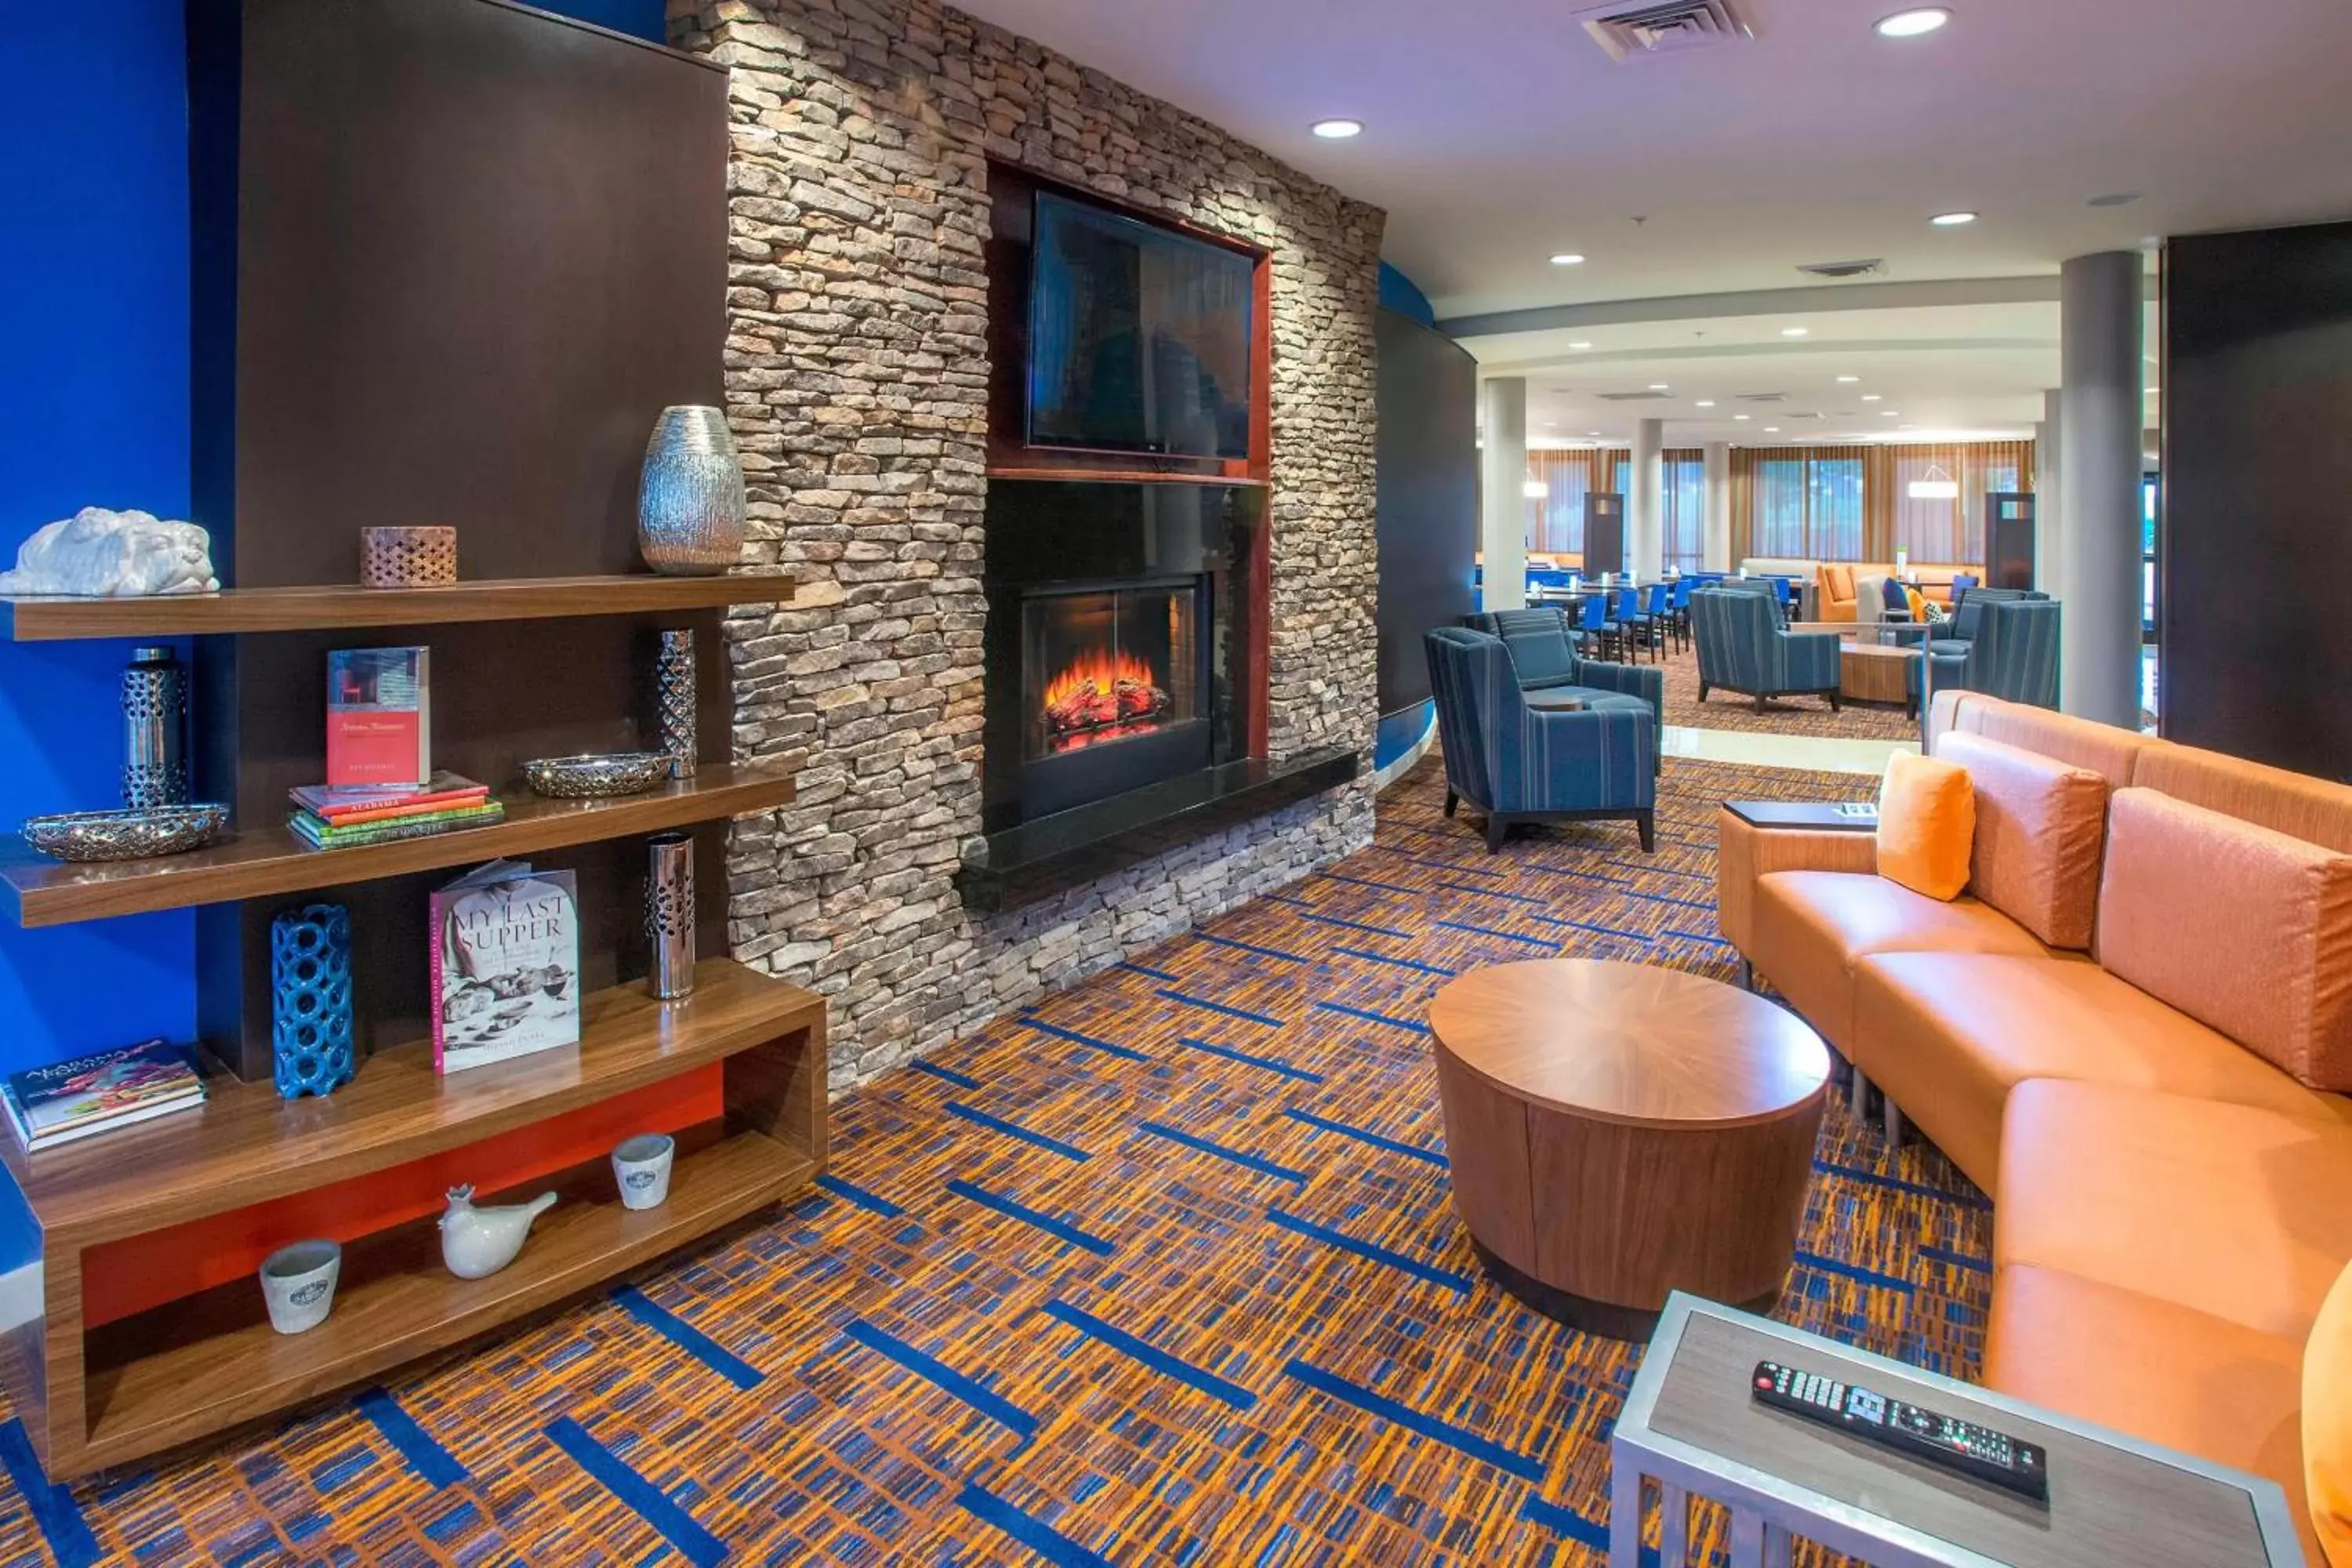 Lobby or reception in Courtyard by Marriott Montgomery Prattville